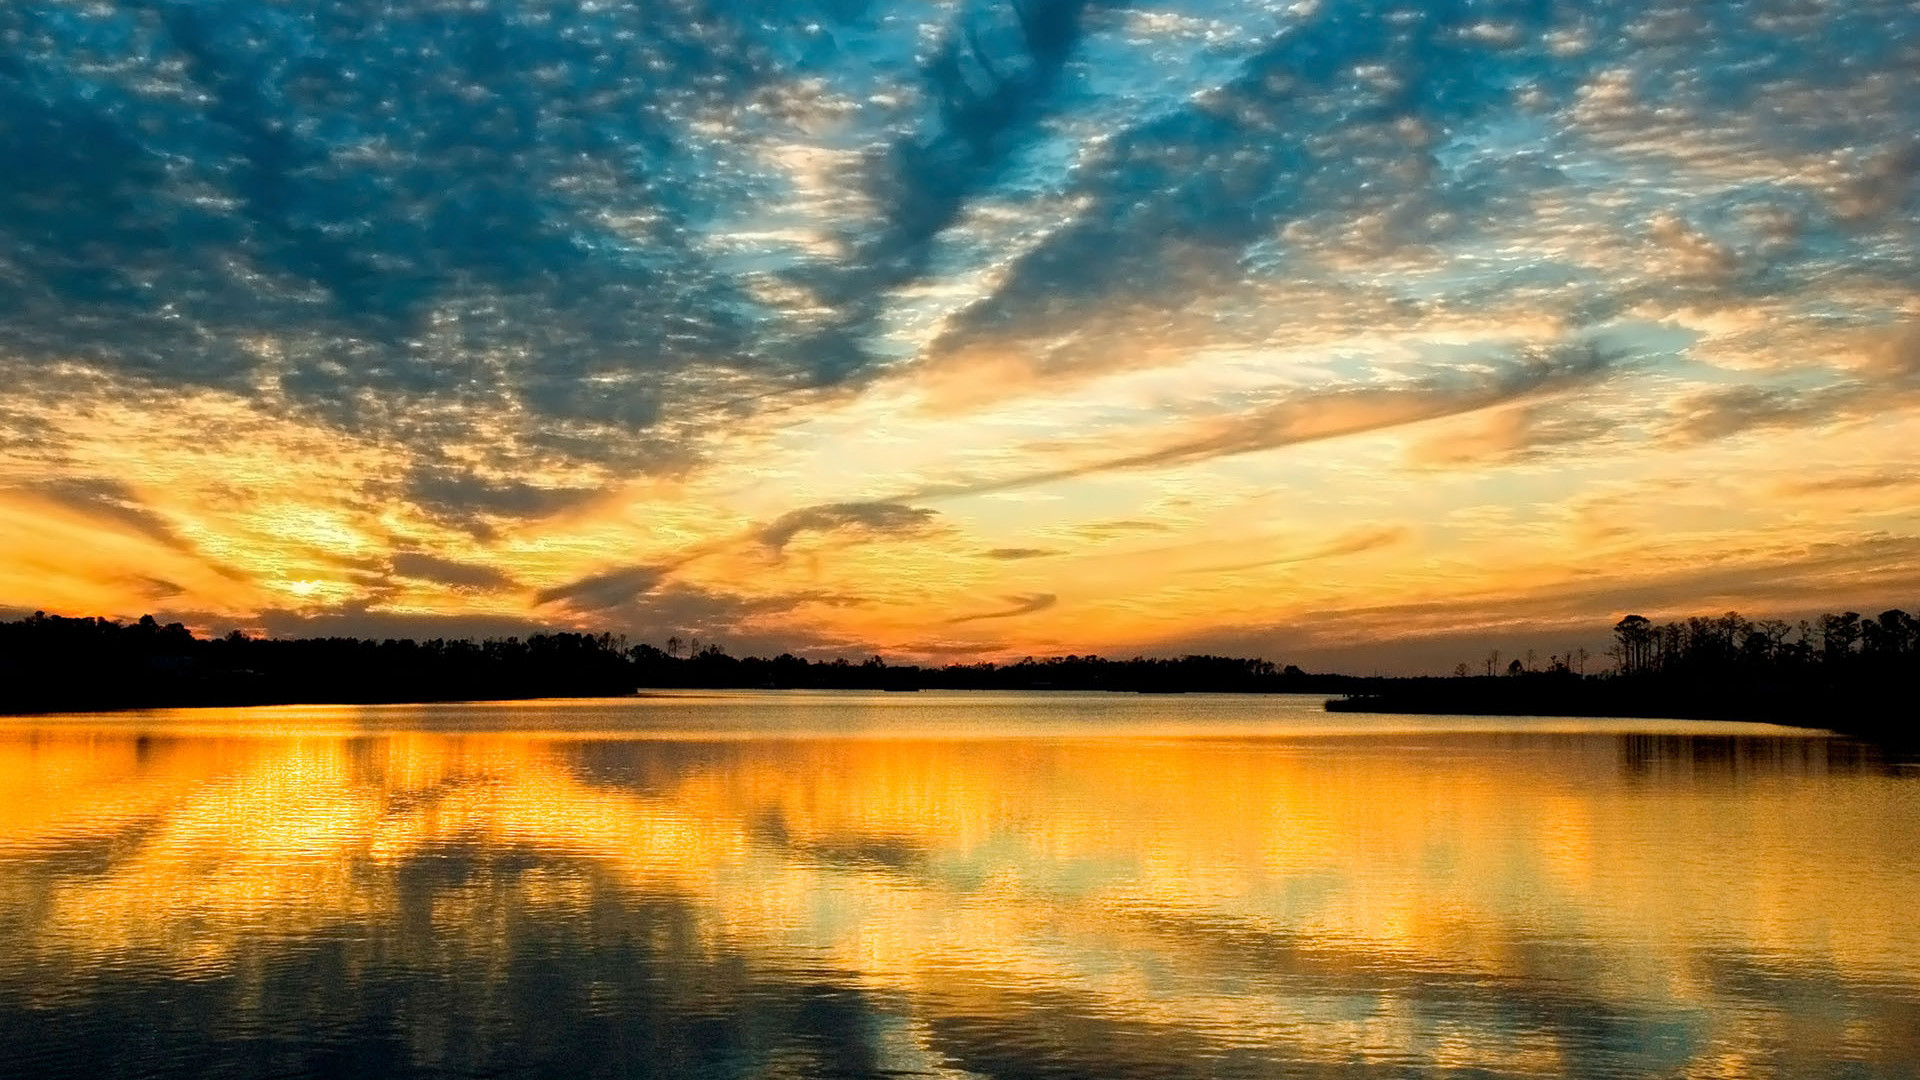 1920x1080 Sunset Background Picture - Free high quality background pictures .